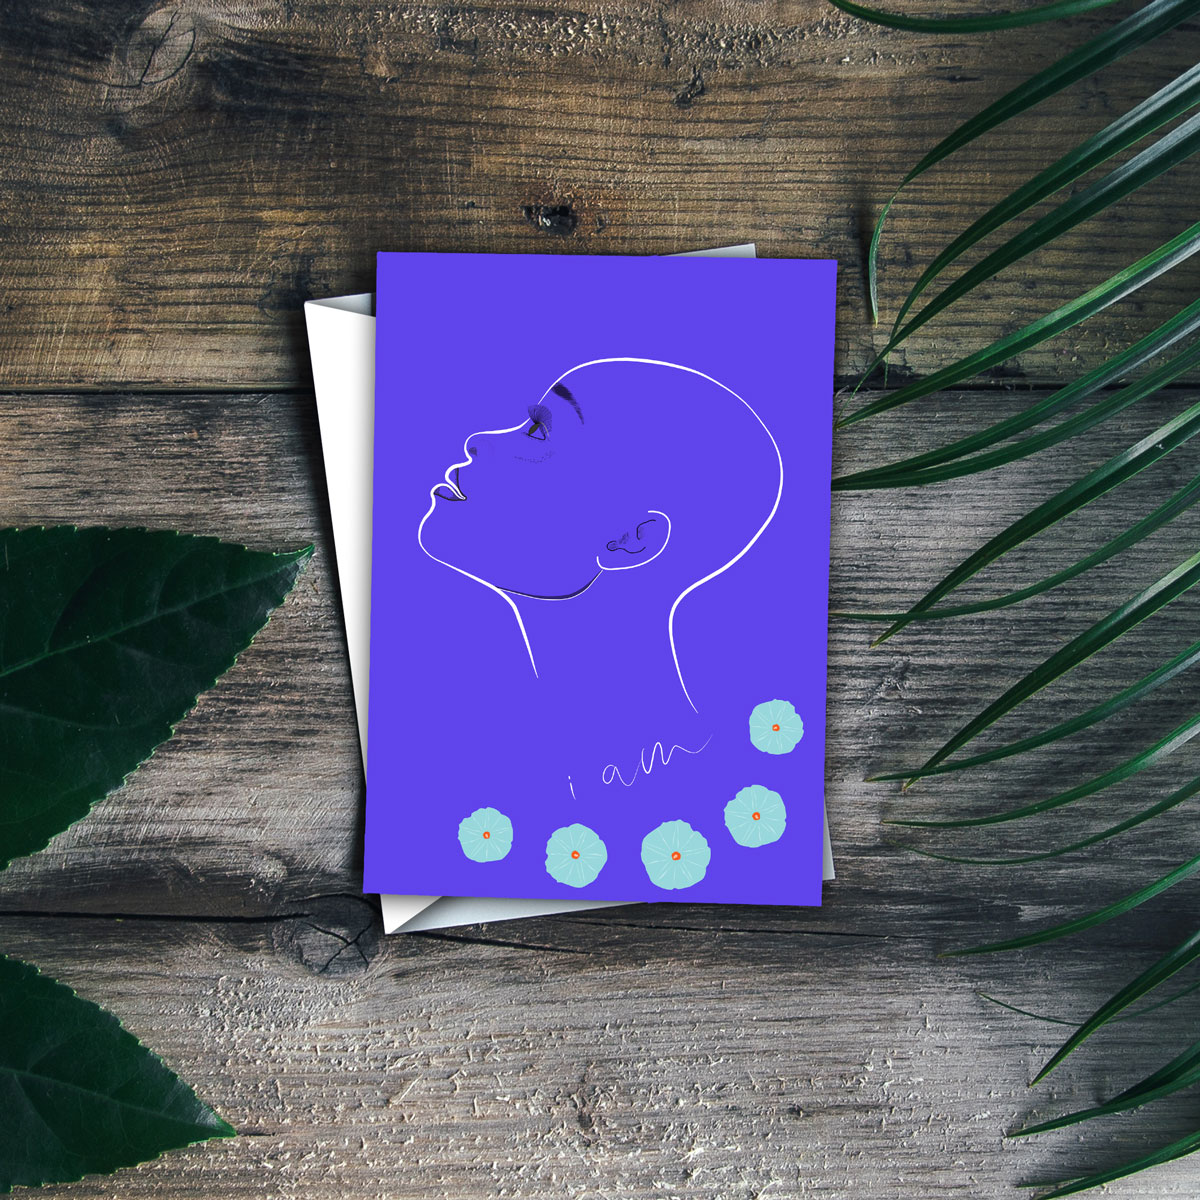 I am complete – card celebrating the beautiful woman in your life